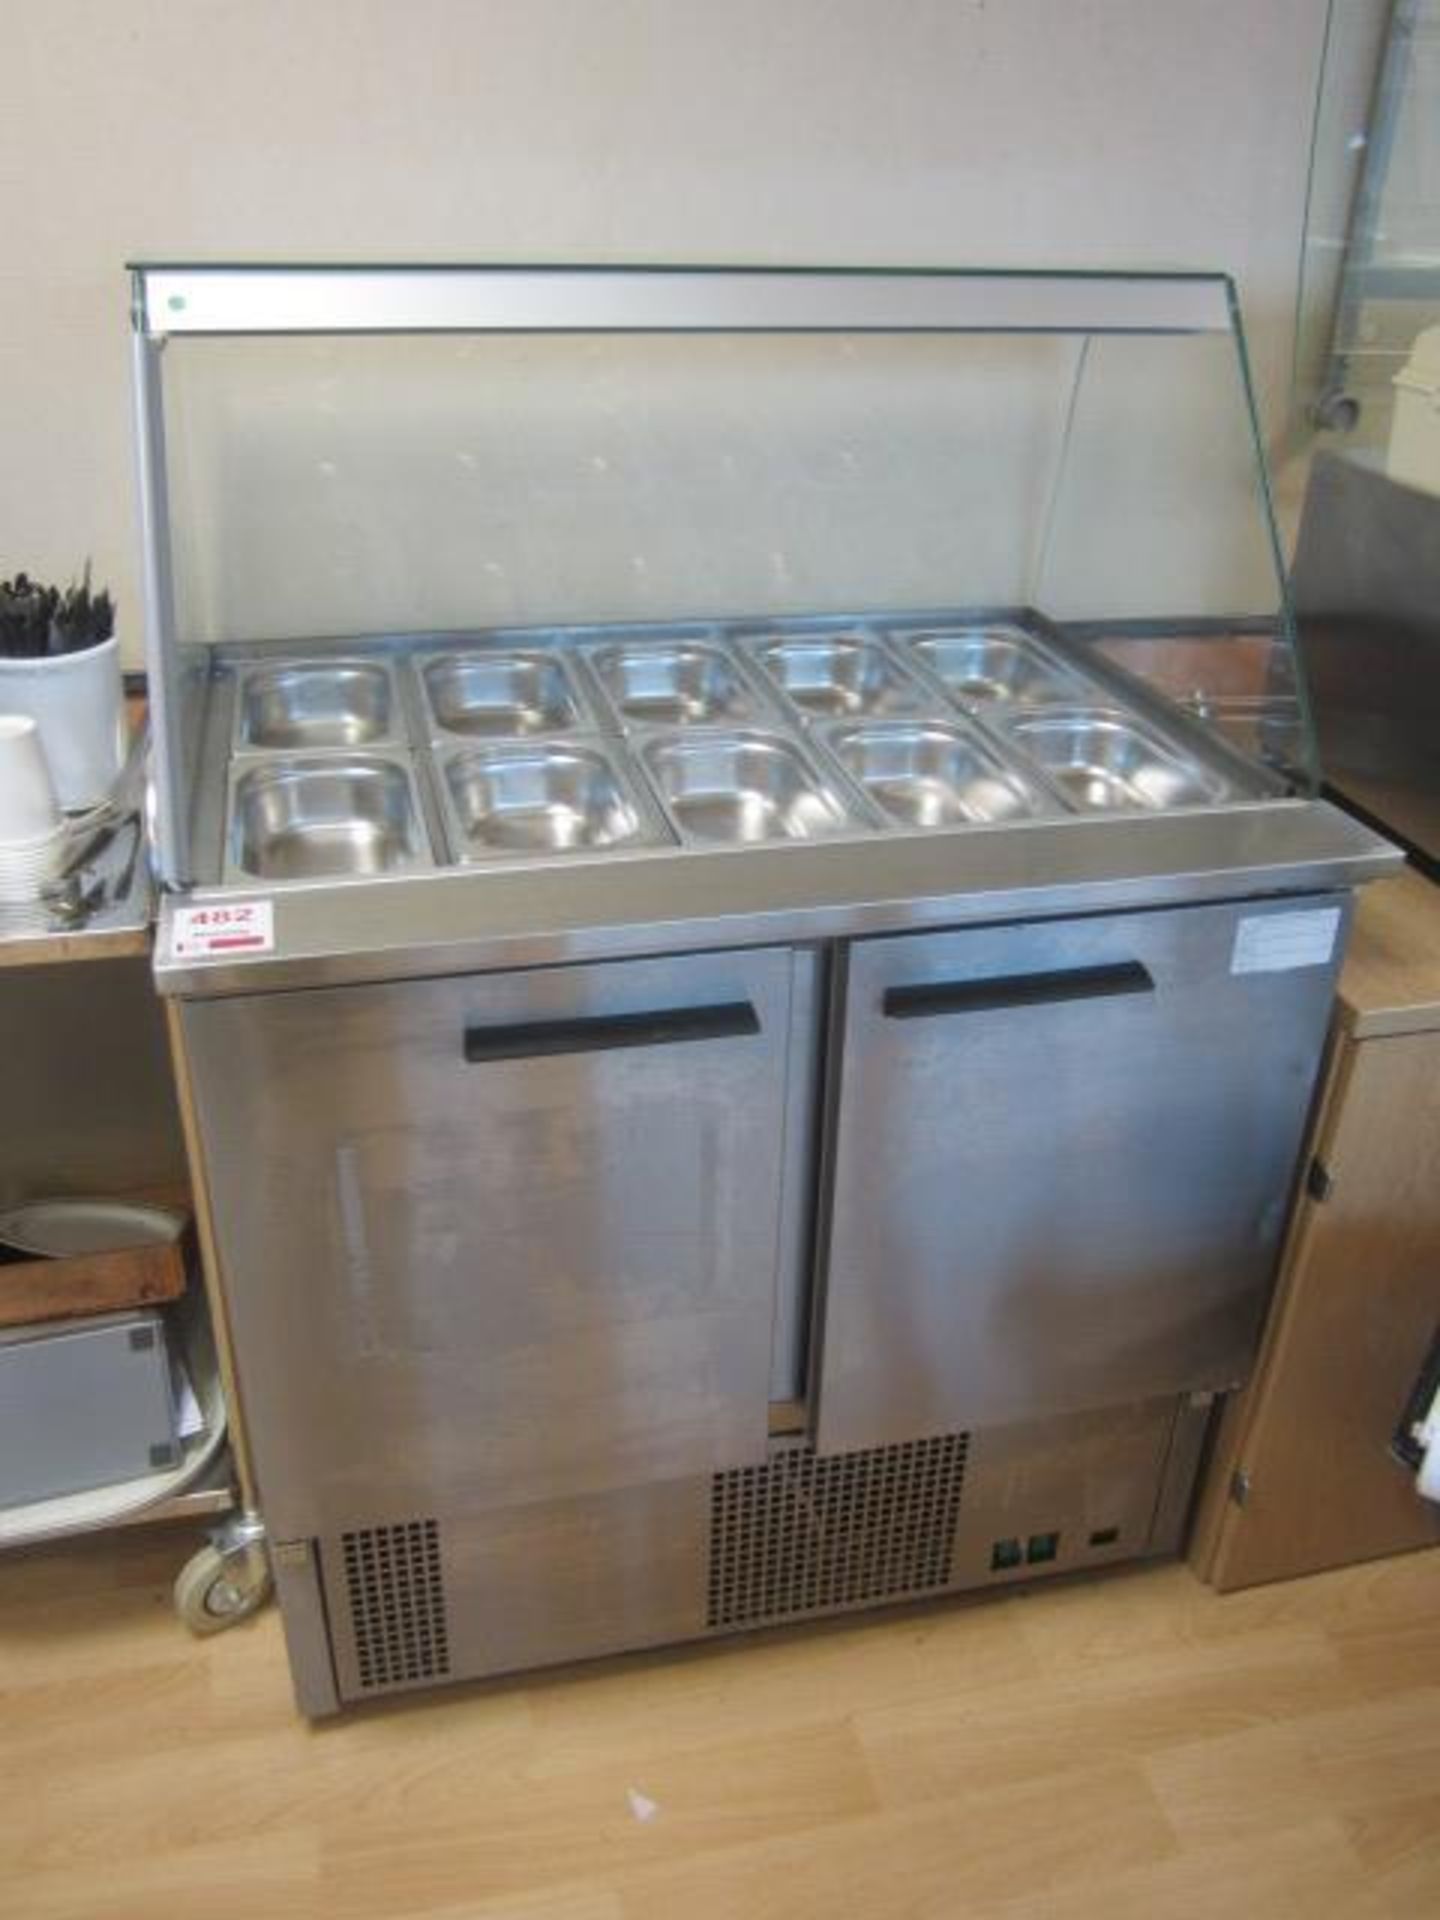 Igloo 10 section stainless steel salad counter, type Ibiza 0.9, serial no. NS-092997, partial glazed